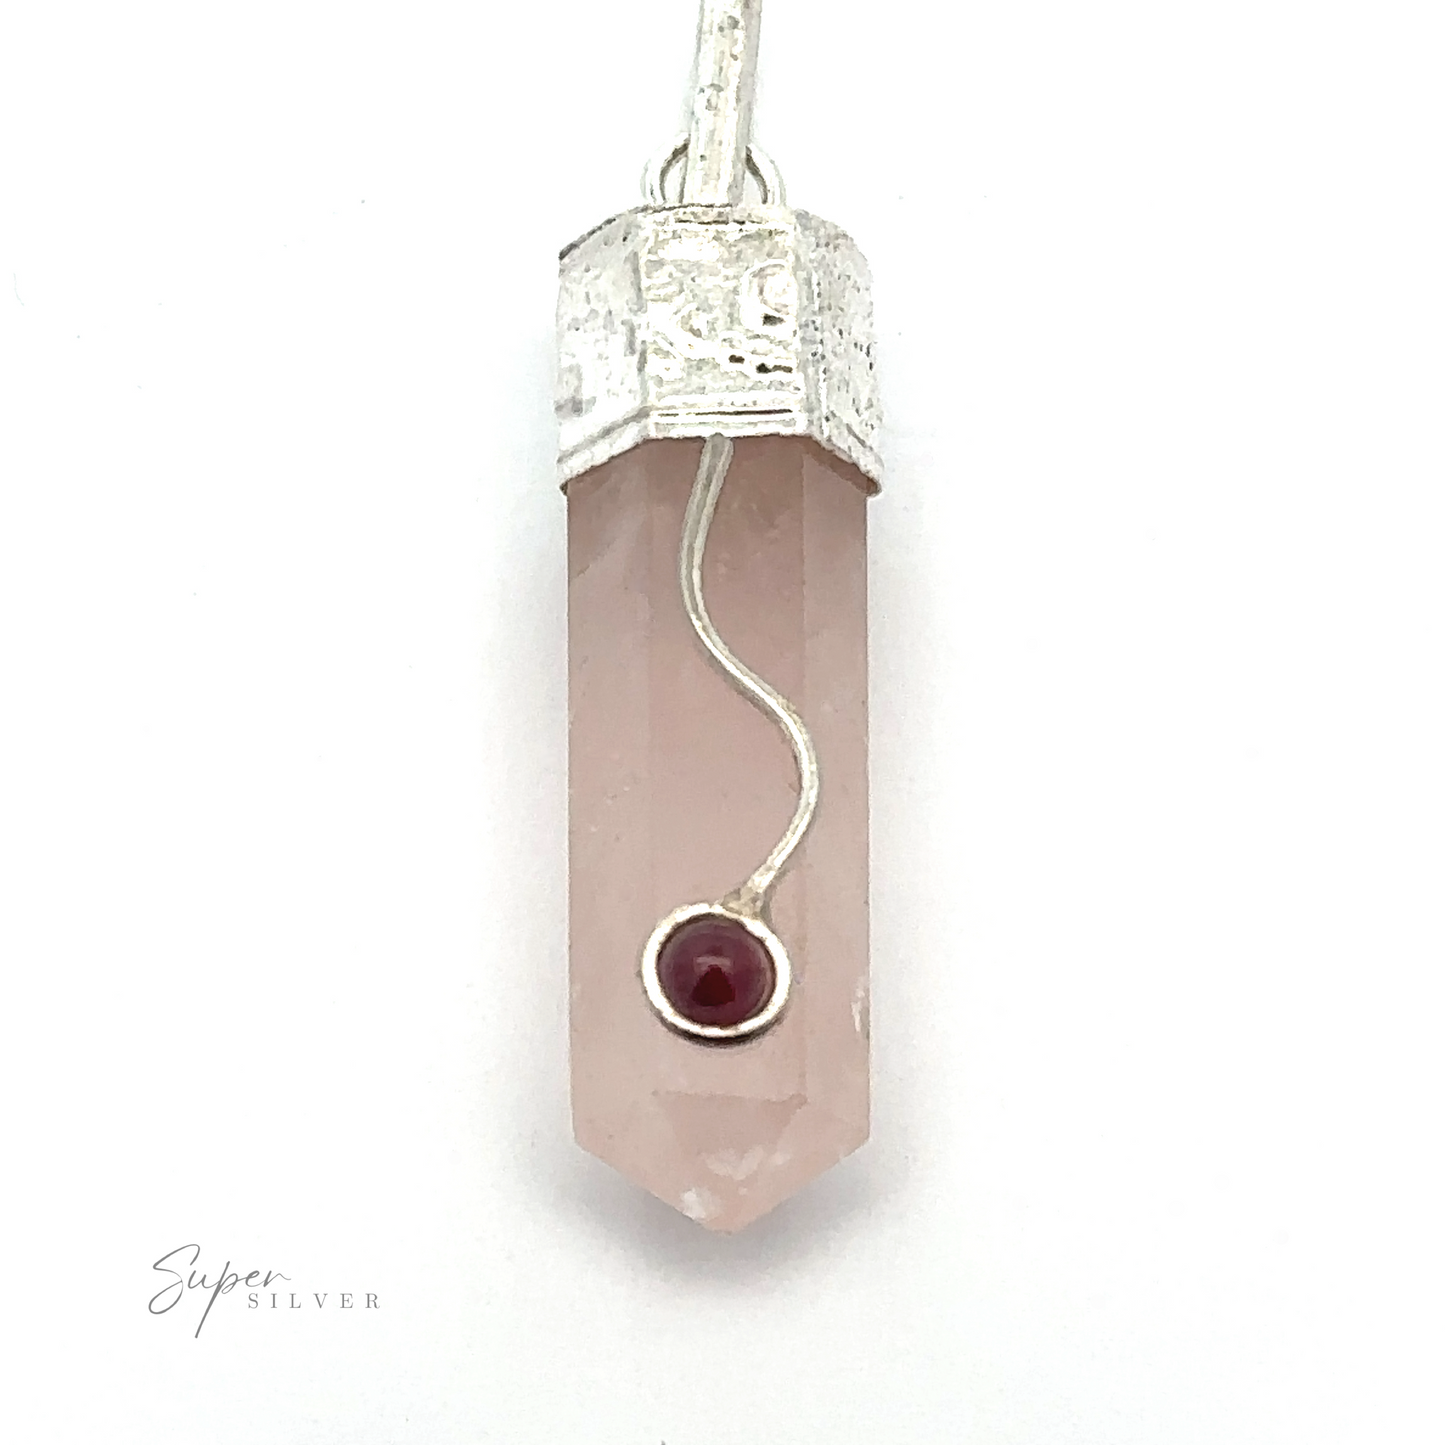 
                  
                    A Crystal Pendant with Decorative Bail featuring a hexagonal pink crystal with a silver cap, accented by a small garnet detail embedded in the silver, hanging from a sleek silver bail.
                  
                